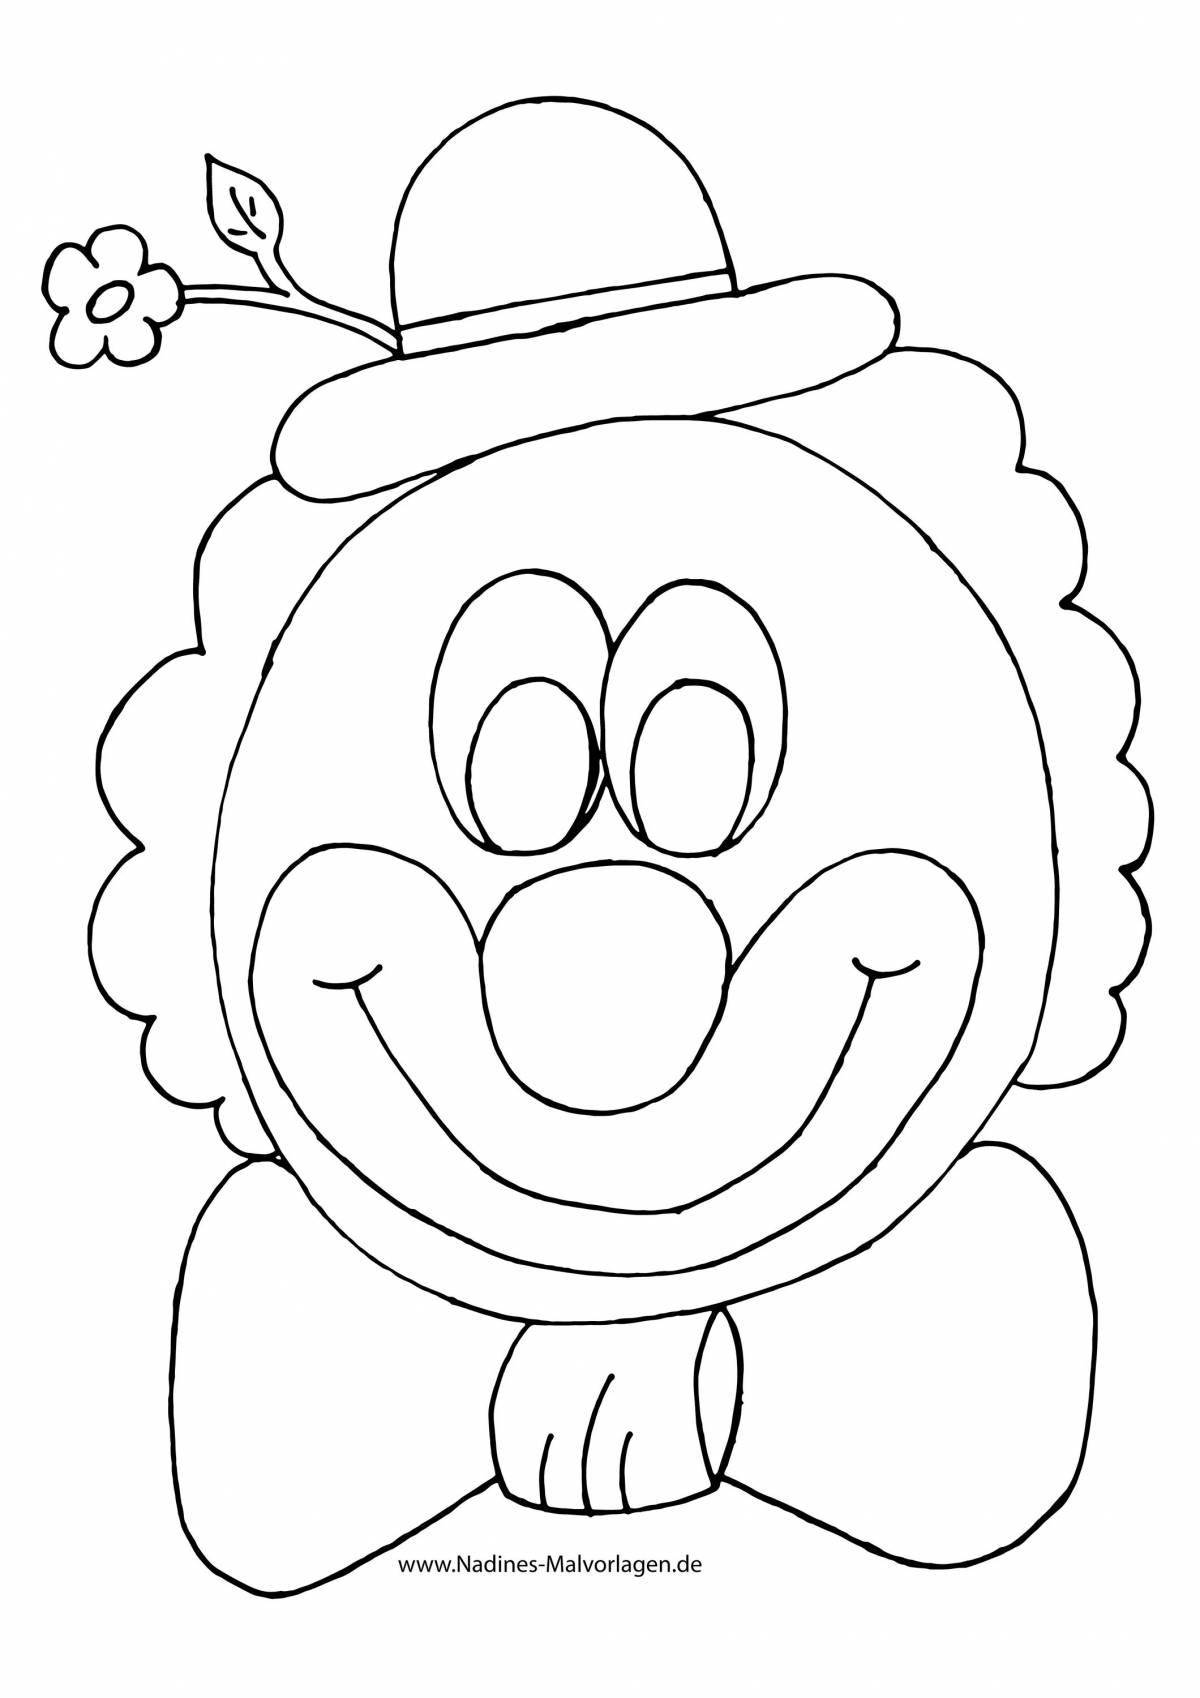 Wonderful clown face coloring page for kids